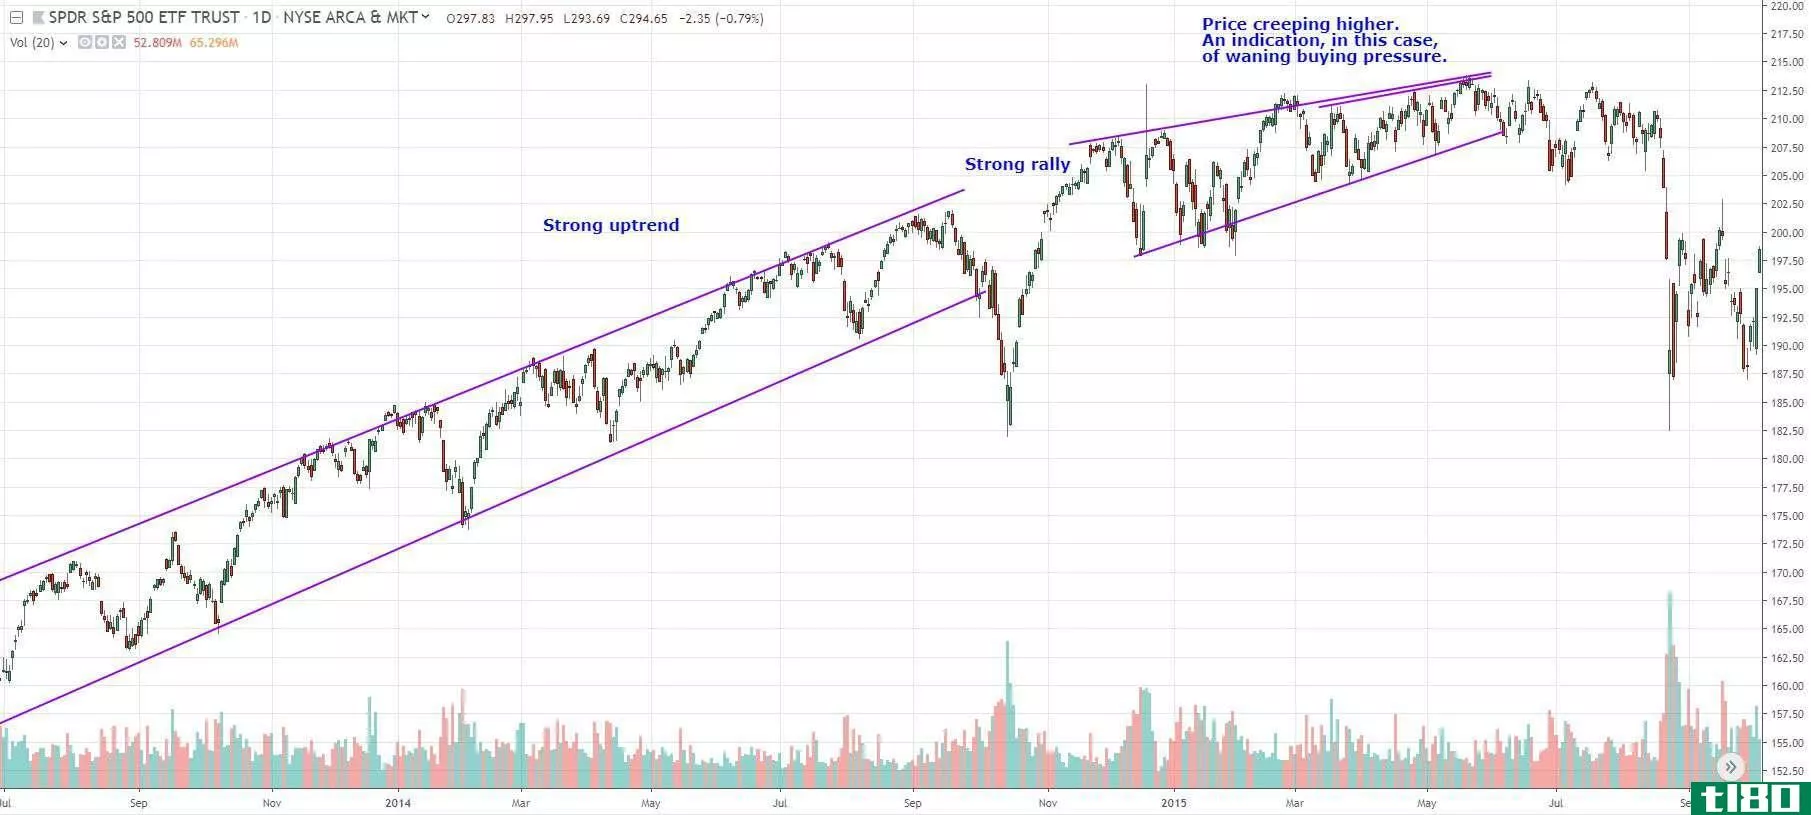 S&P 500 index with uptrend and then price creep